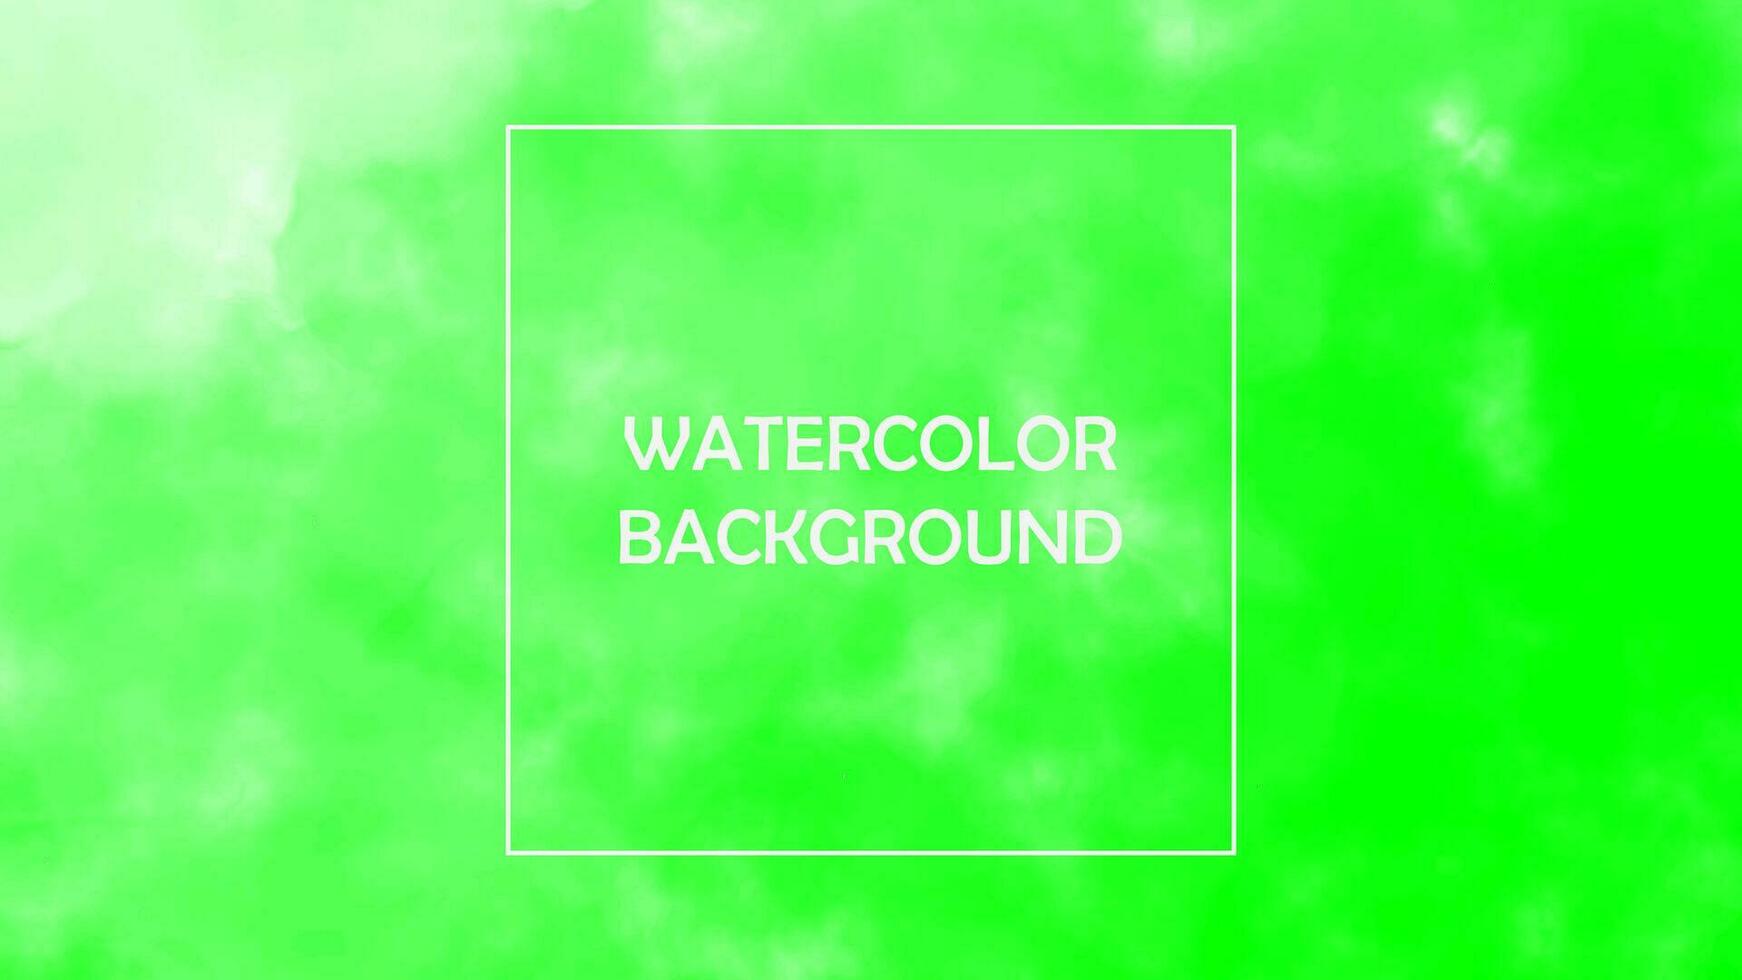 4k watercolor gradient mesh blur background with pastel, colorful, beauty, green color vector